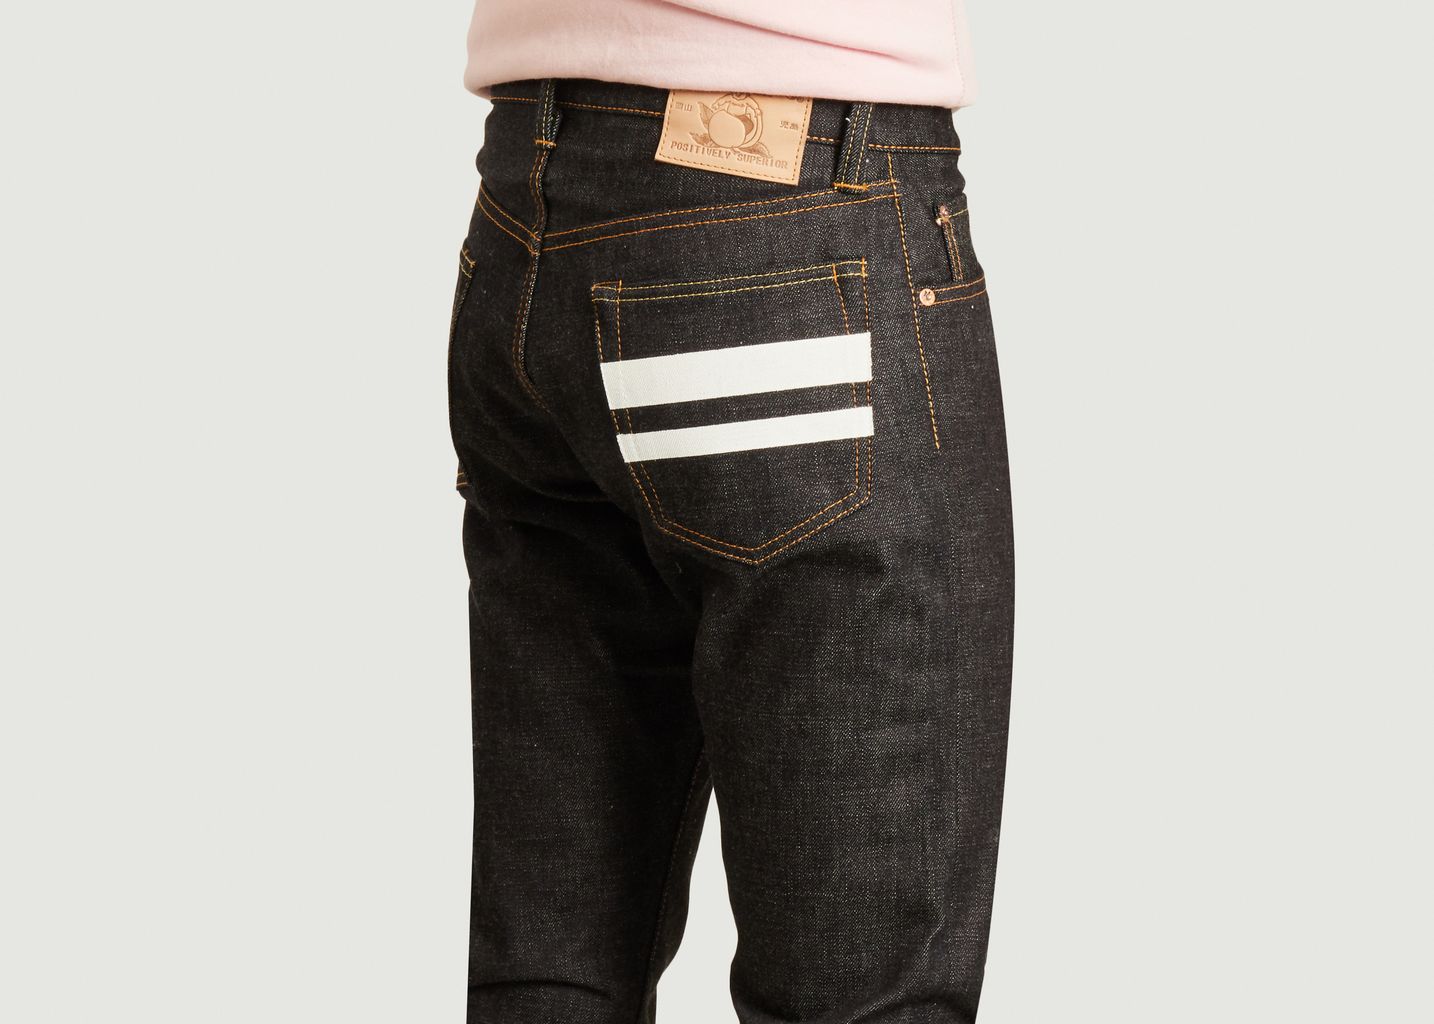 High trapered 15.7 oz 0405 jeans - Momotaro Jeans